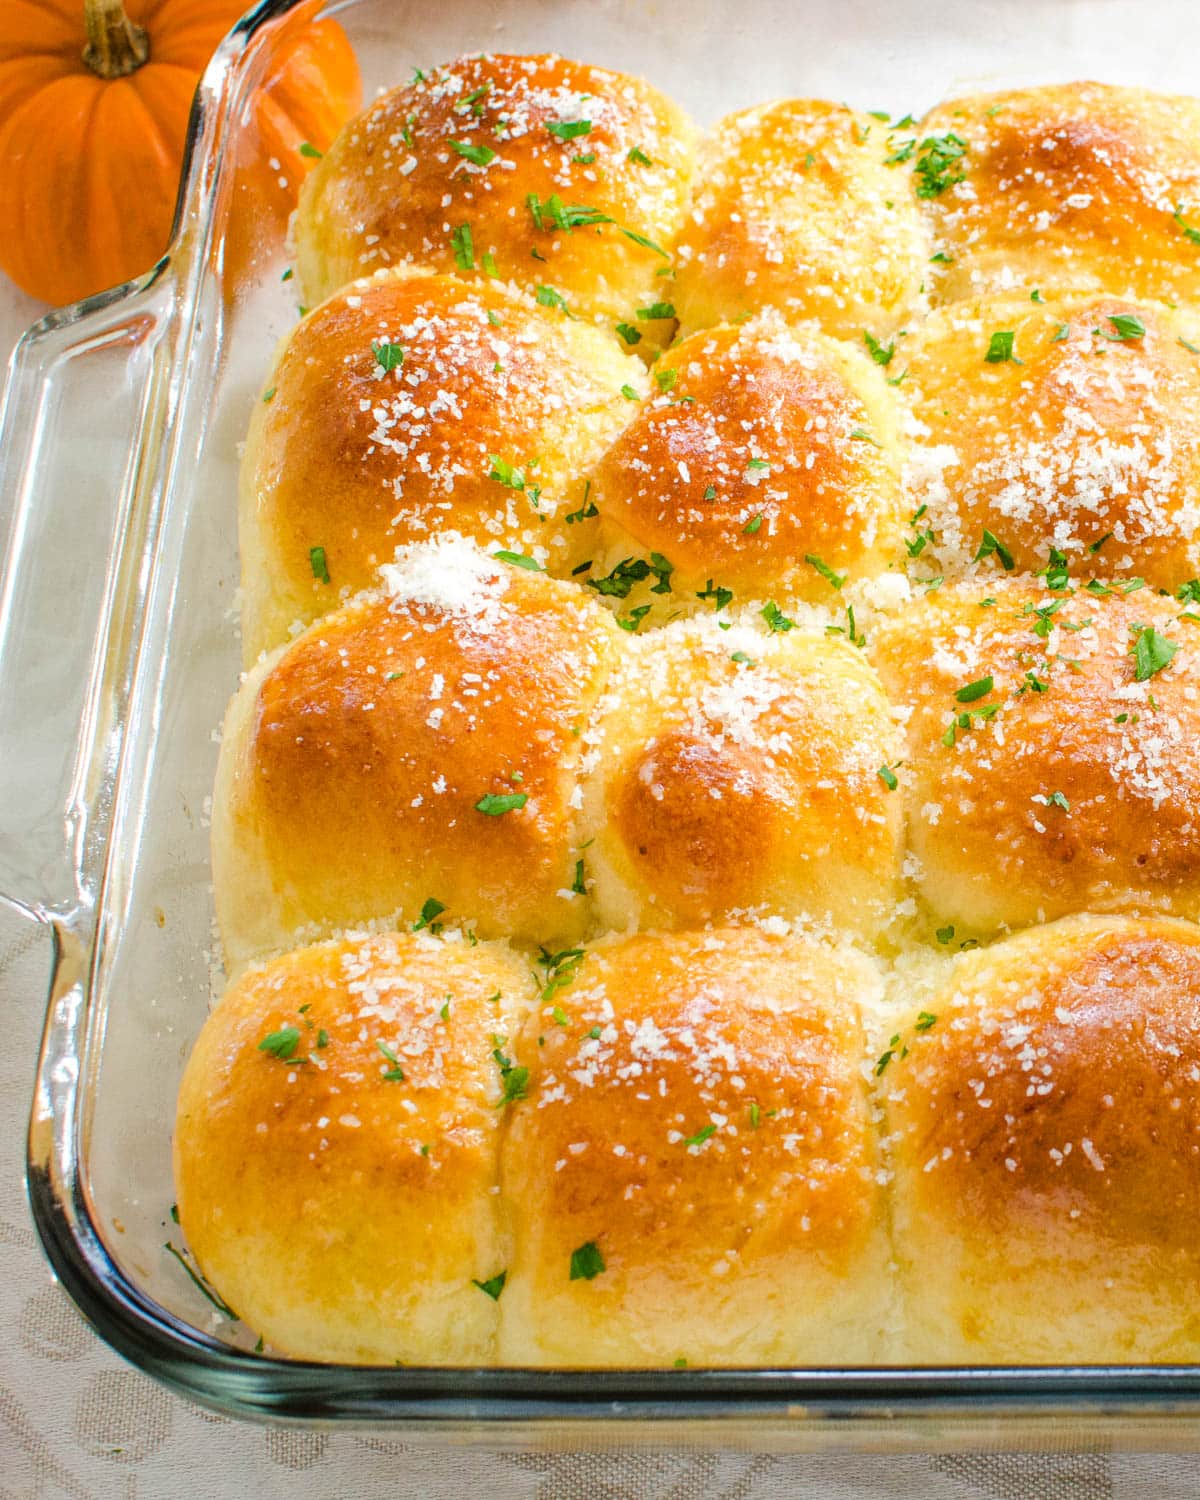 Yeast rolls with cheese and parsley garnish.